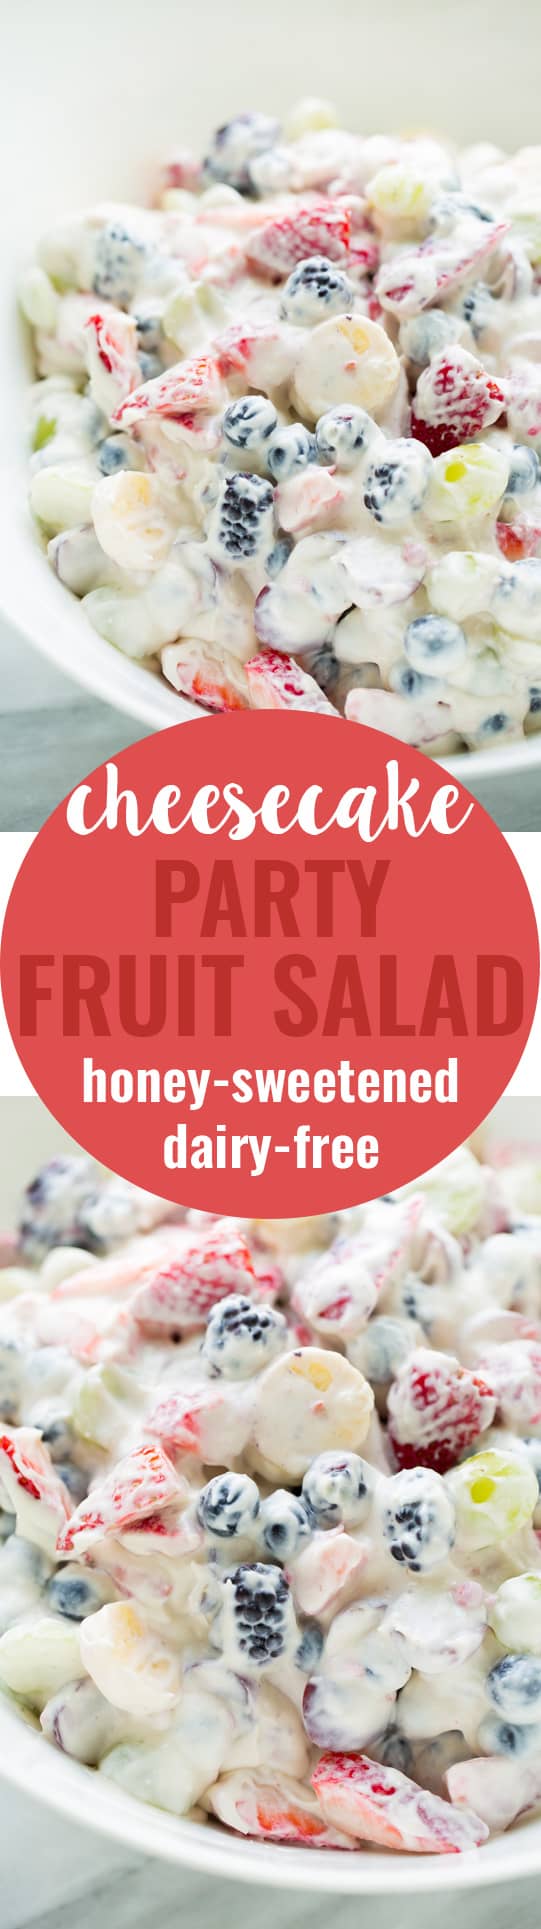 Healthy Cheesecake Fruit Salad! Perfect for parties and potlucks. Dairy-free and honey-sweetened!